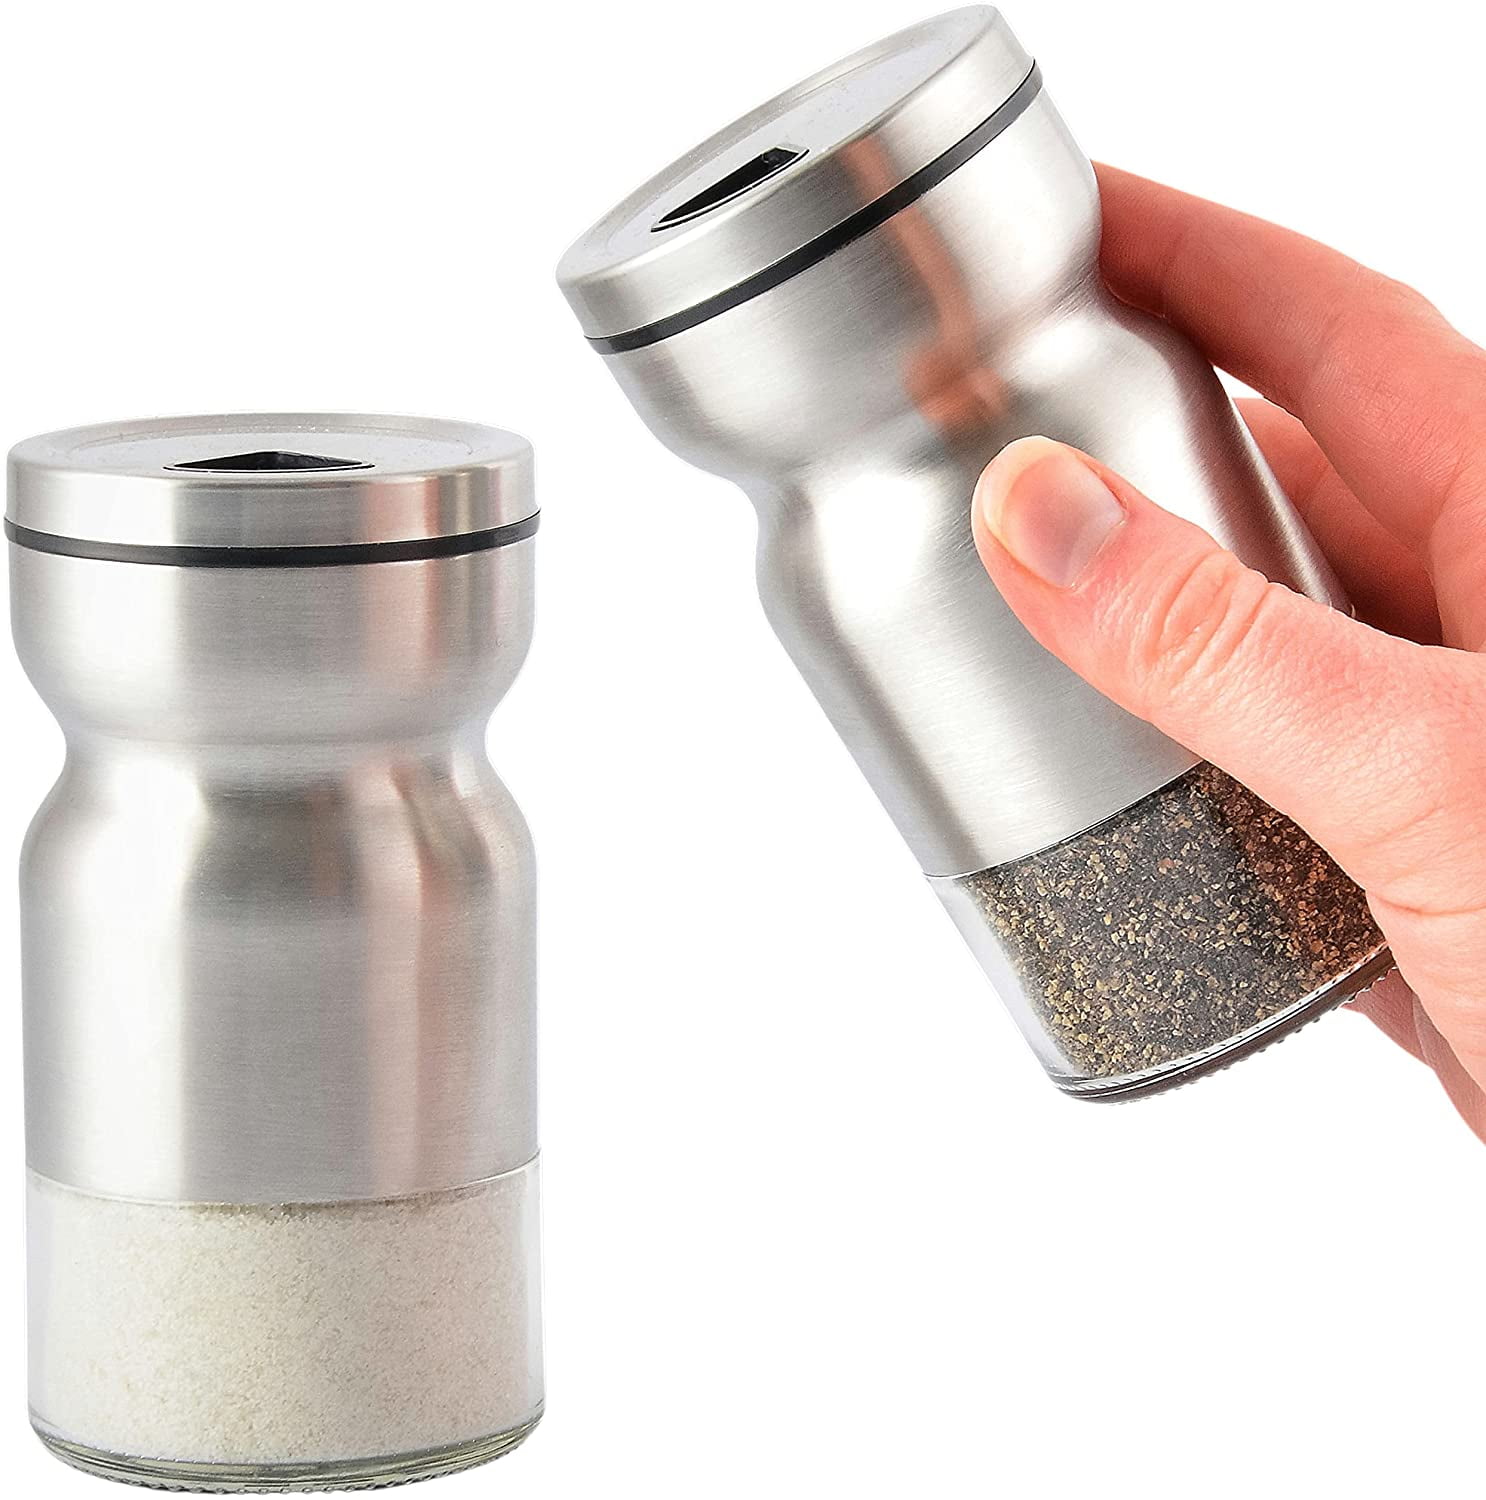 and Seasoning Spices by Hawbys Stainless Steel Salt Shaker with Glass Base Easy Refill and Cleaning with Adjustable Pour Holes Salt and Pepper Shakers Set Kosher Salt Himalayan Salt